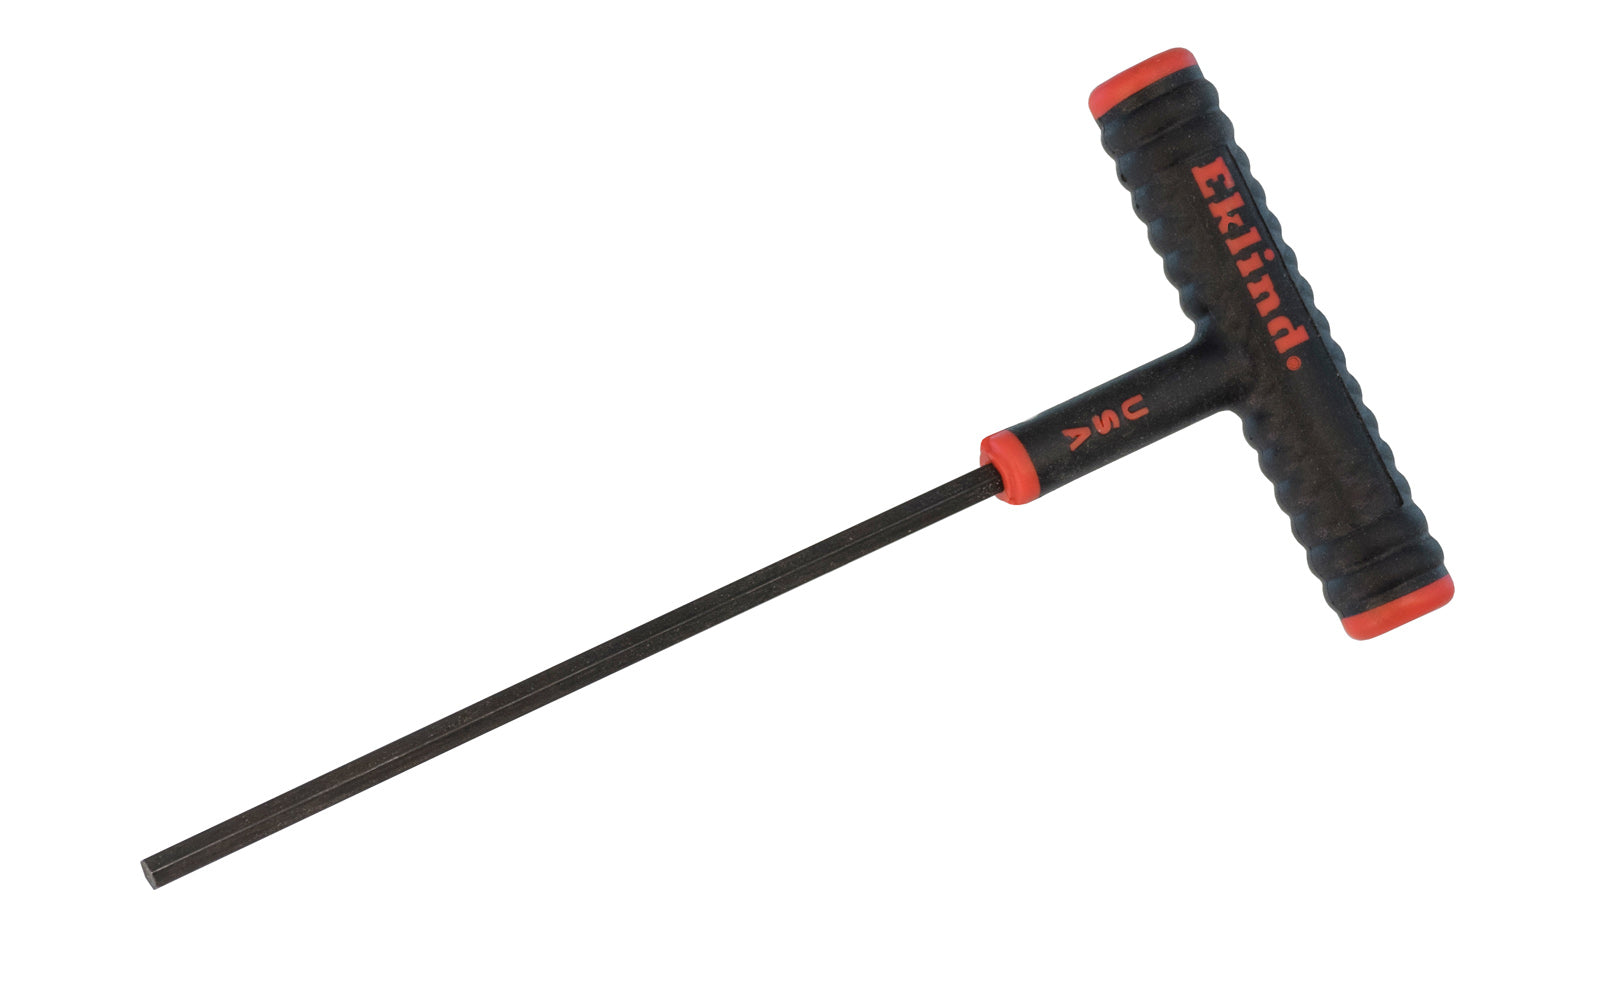 This quality Eklind Cushion Grip SAE Hex T-Key is manufactured using the finest quality alloy steel. Available in 3/32", 7/64", 1/8", 9/64", 5/32", 3/16", 7/32", 1/4", 5/16", & 3/8" sizes. 6" length shaft. Hardened, tempered & finished with Eklind black finish to resist rust. Allen T-handle hex key wrench. Made in USA.